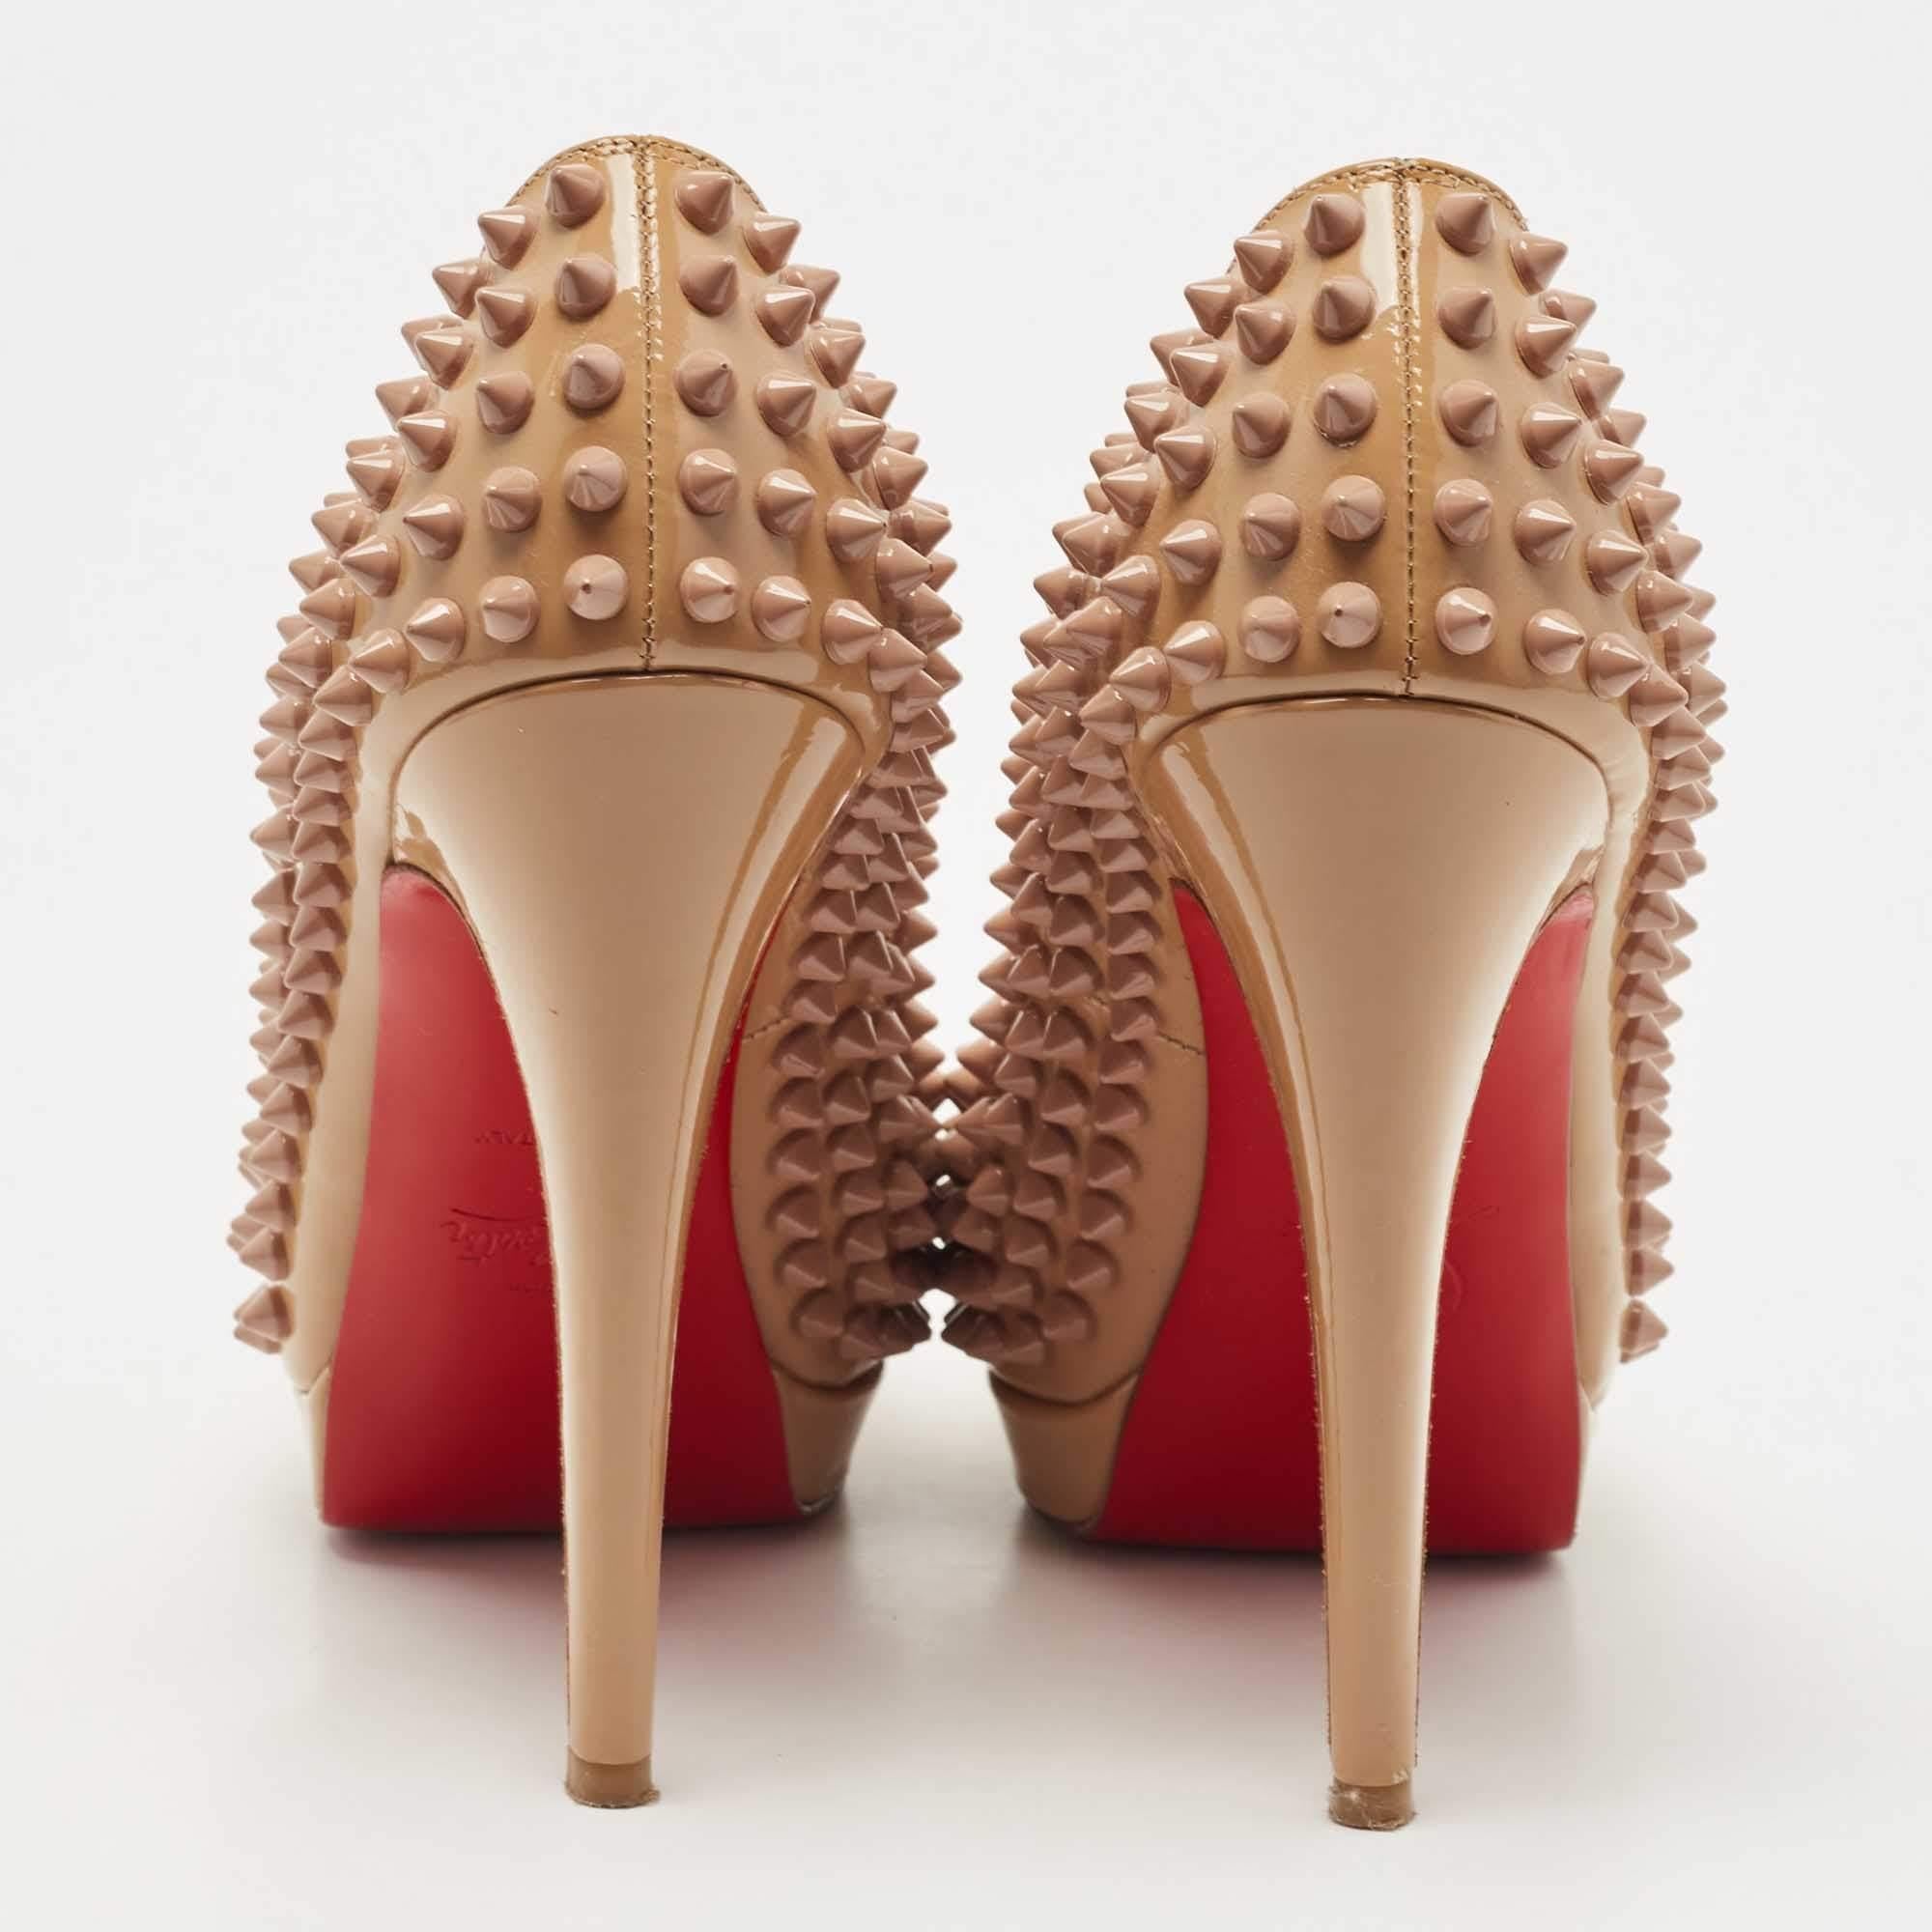 Christian Louboutin Beige Patent Leather Alti Spiked Platform Pumps Size 36 For Sale 1